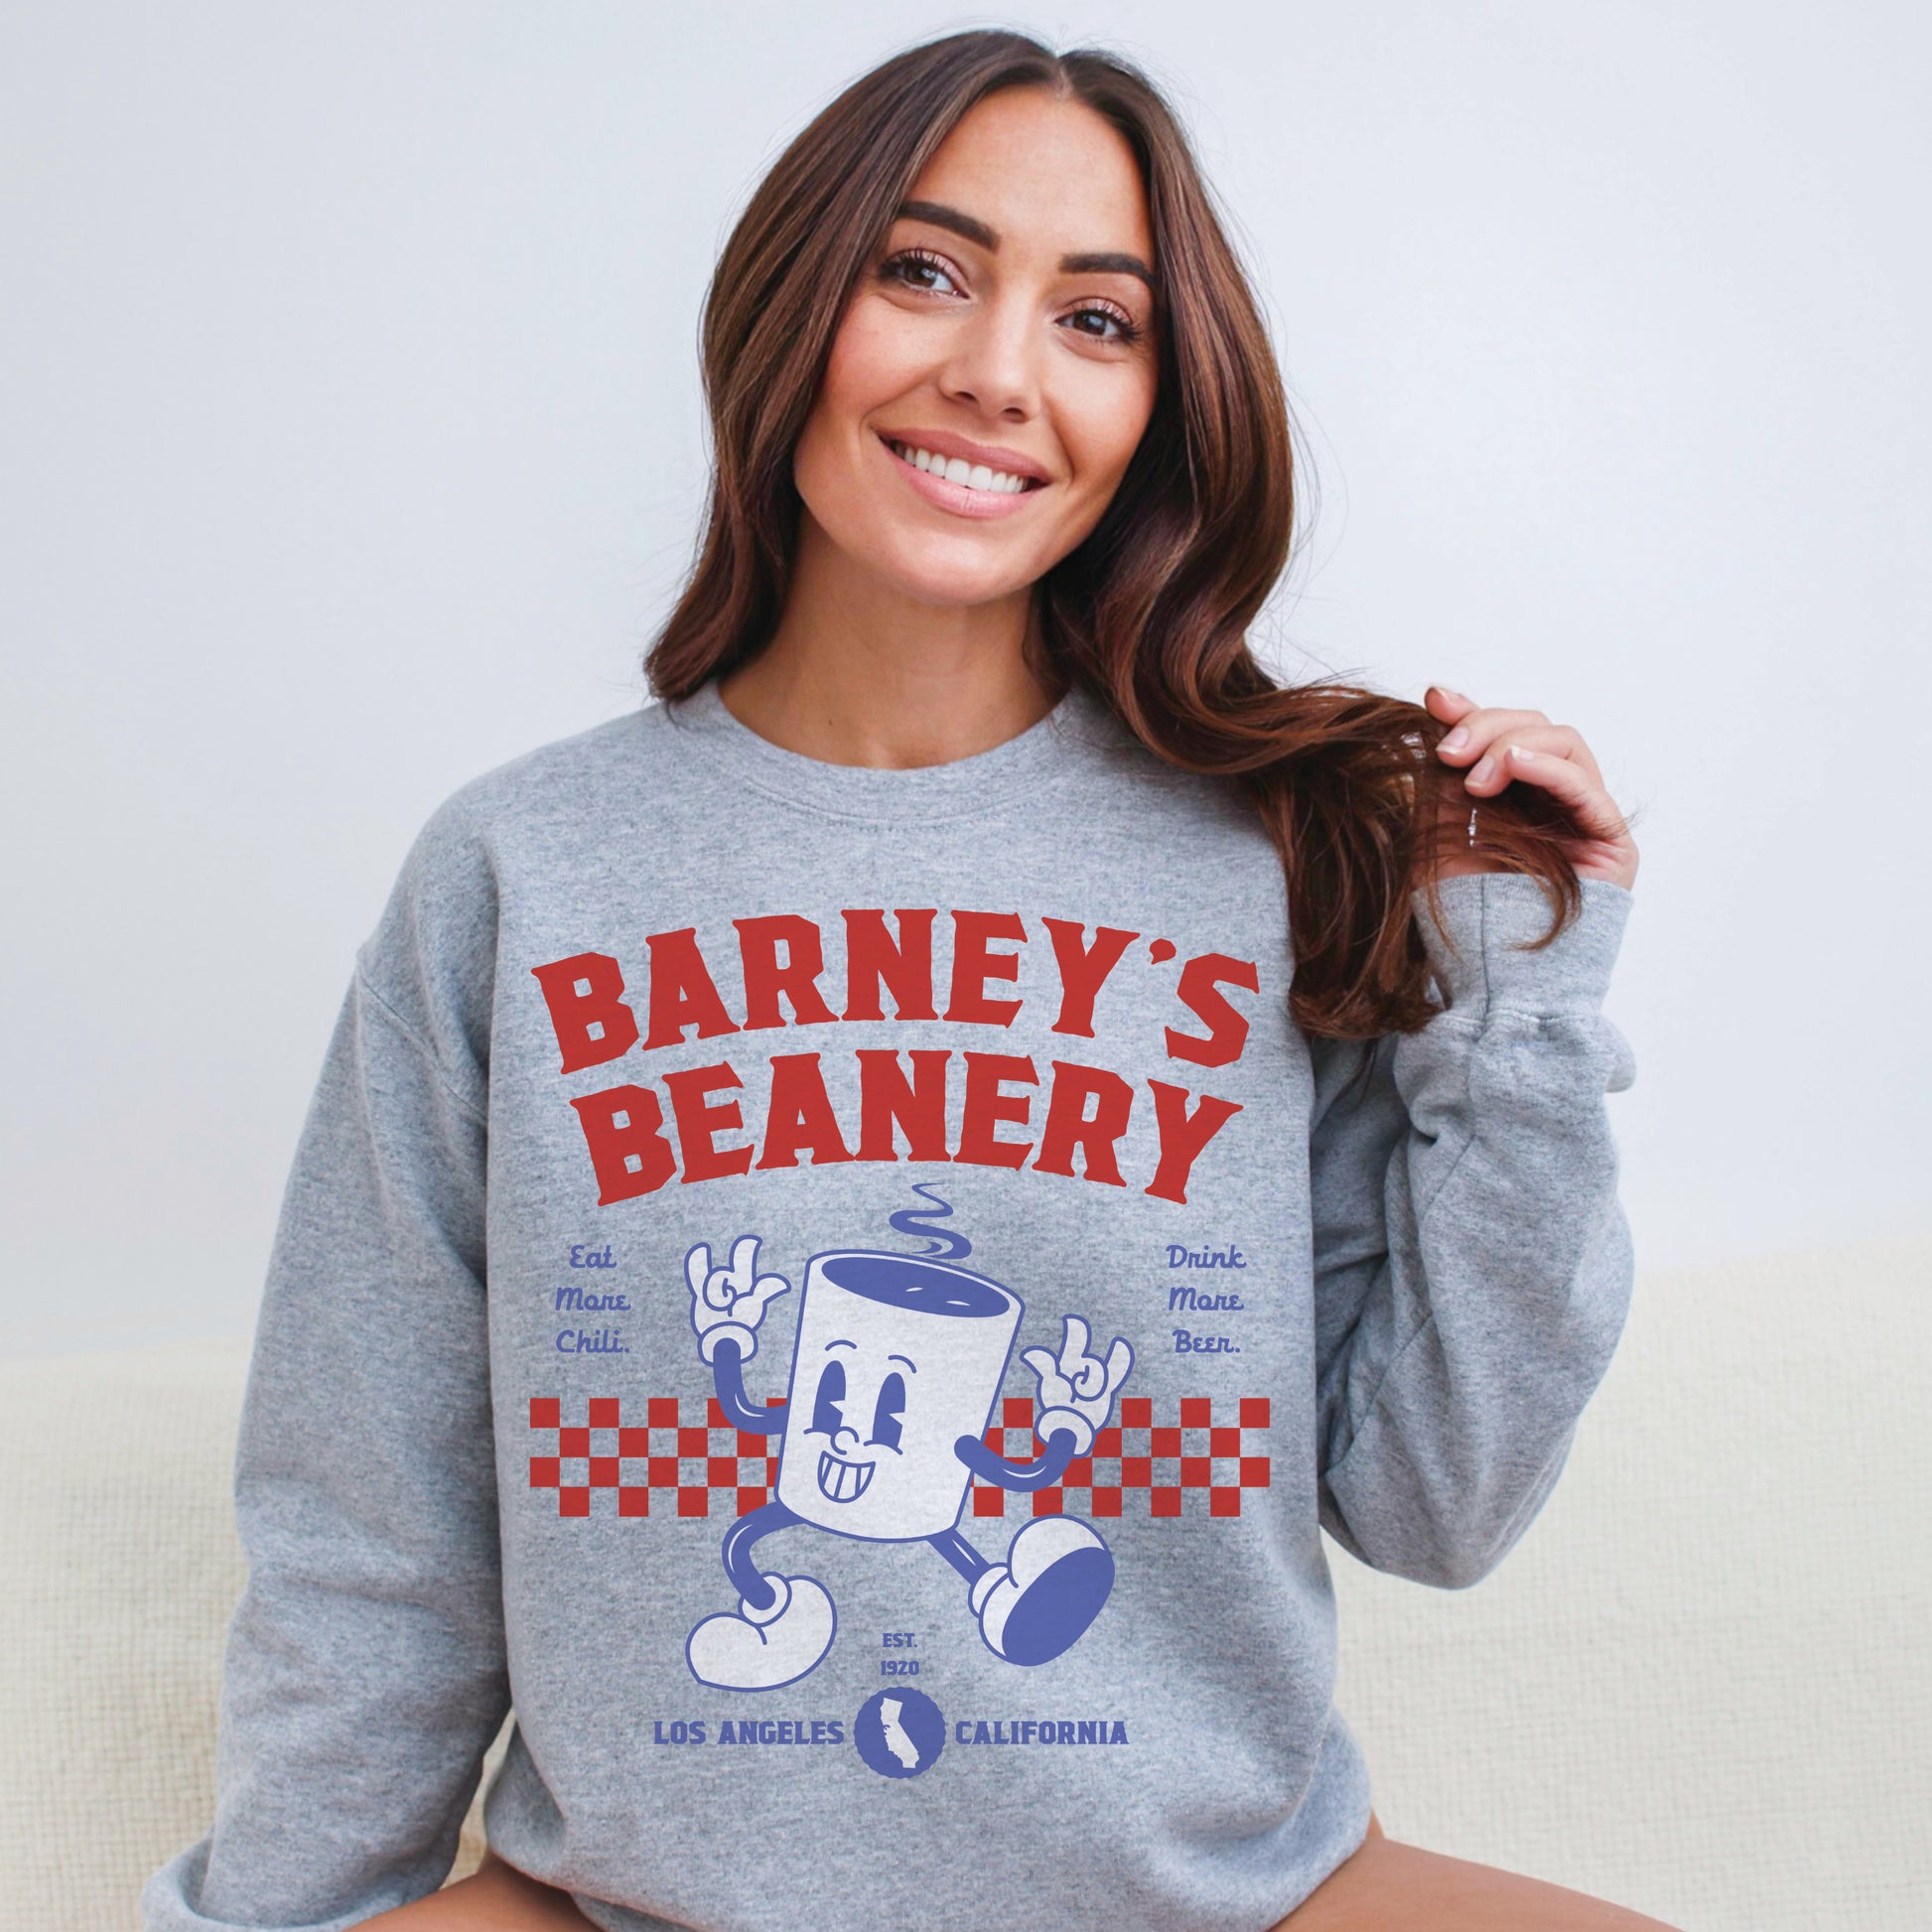 Eat More Chili. Drink More Beer. | BARNEY'S BEANERY Red & Blue - Women's Retro Graphic Sweatshirt | Red And Blue Graphics On Sport Grey Gildan 18000 Sweatshirt, Front View Female Lifestyle Image